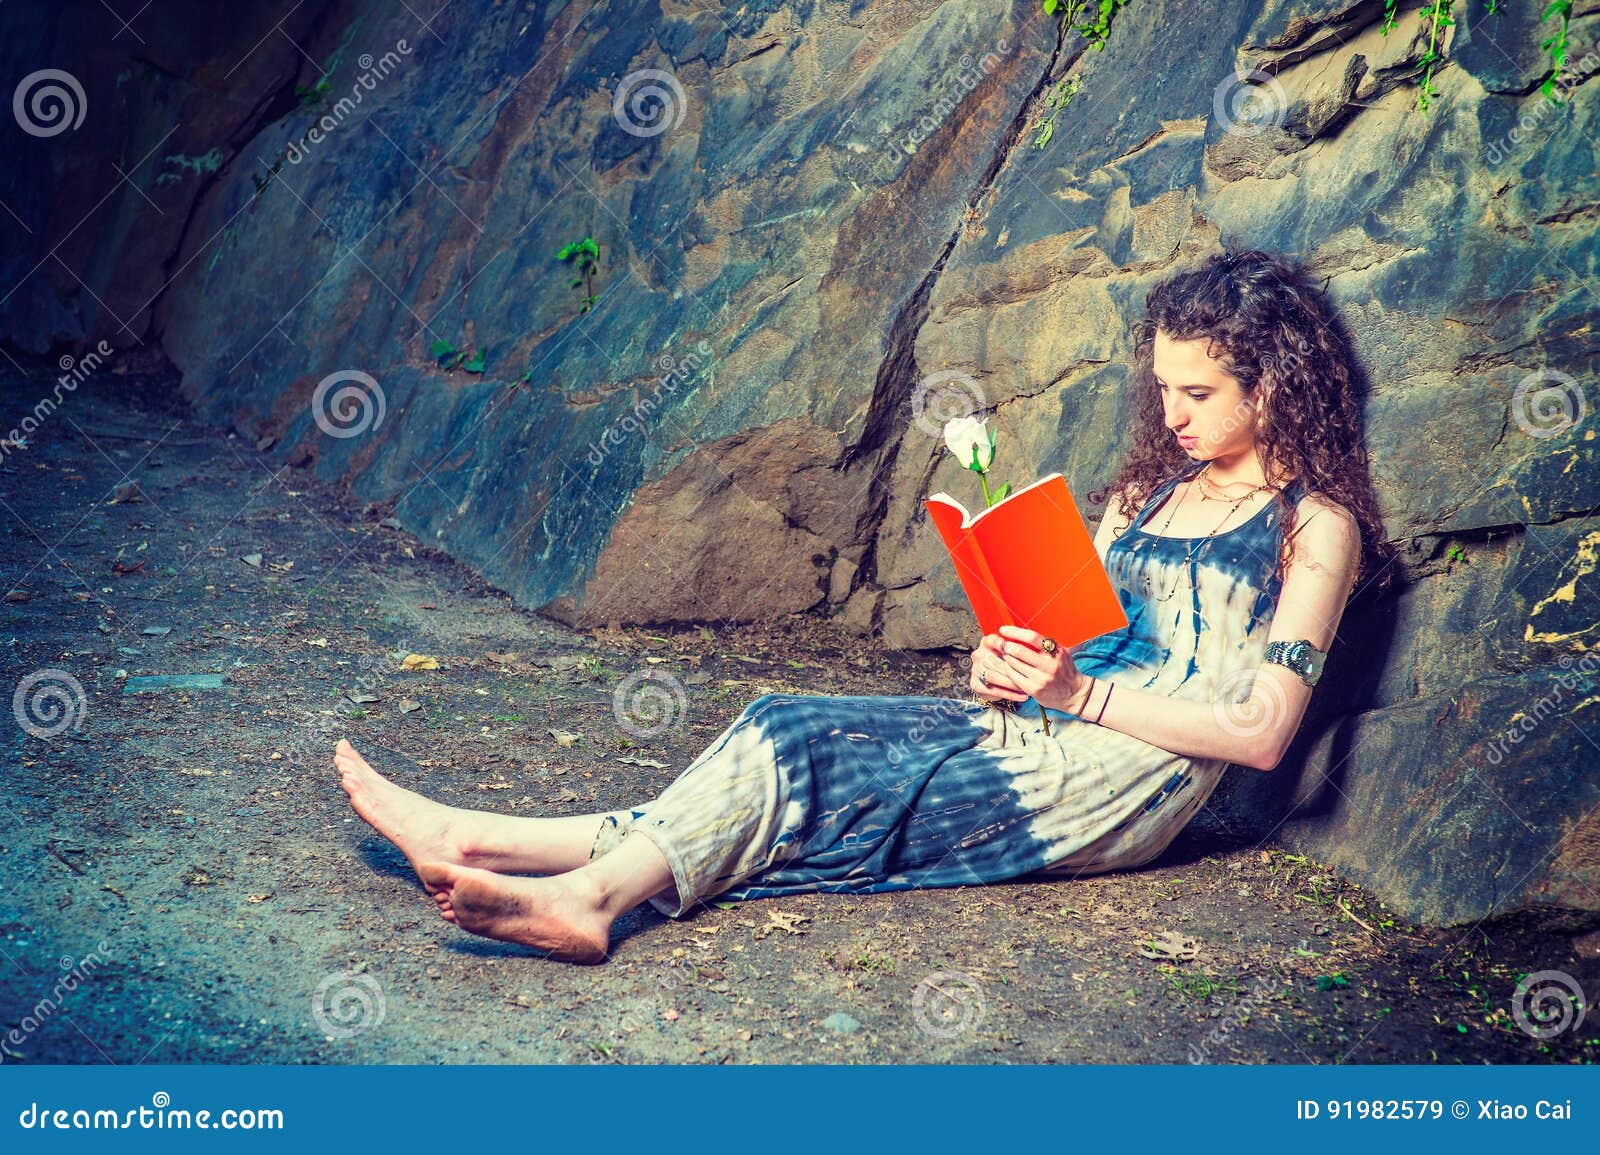 https://thumbs.dreamstime.com/z/young-american-woman-reading-red-book-sitting-ground-travel-girl-outside-wearing-long-dress-barefoot-pretty-teenage-college-91982579.jpg